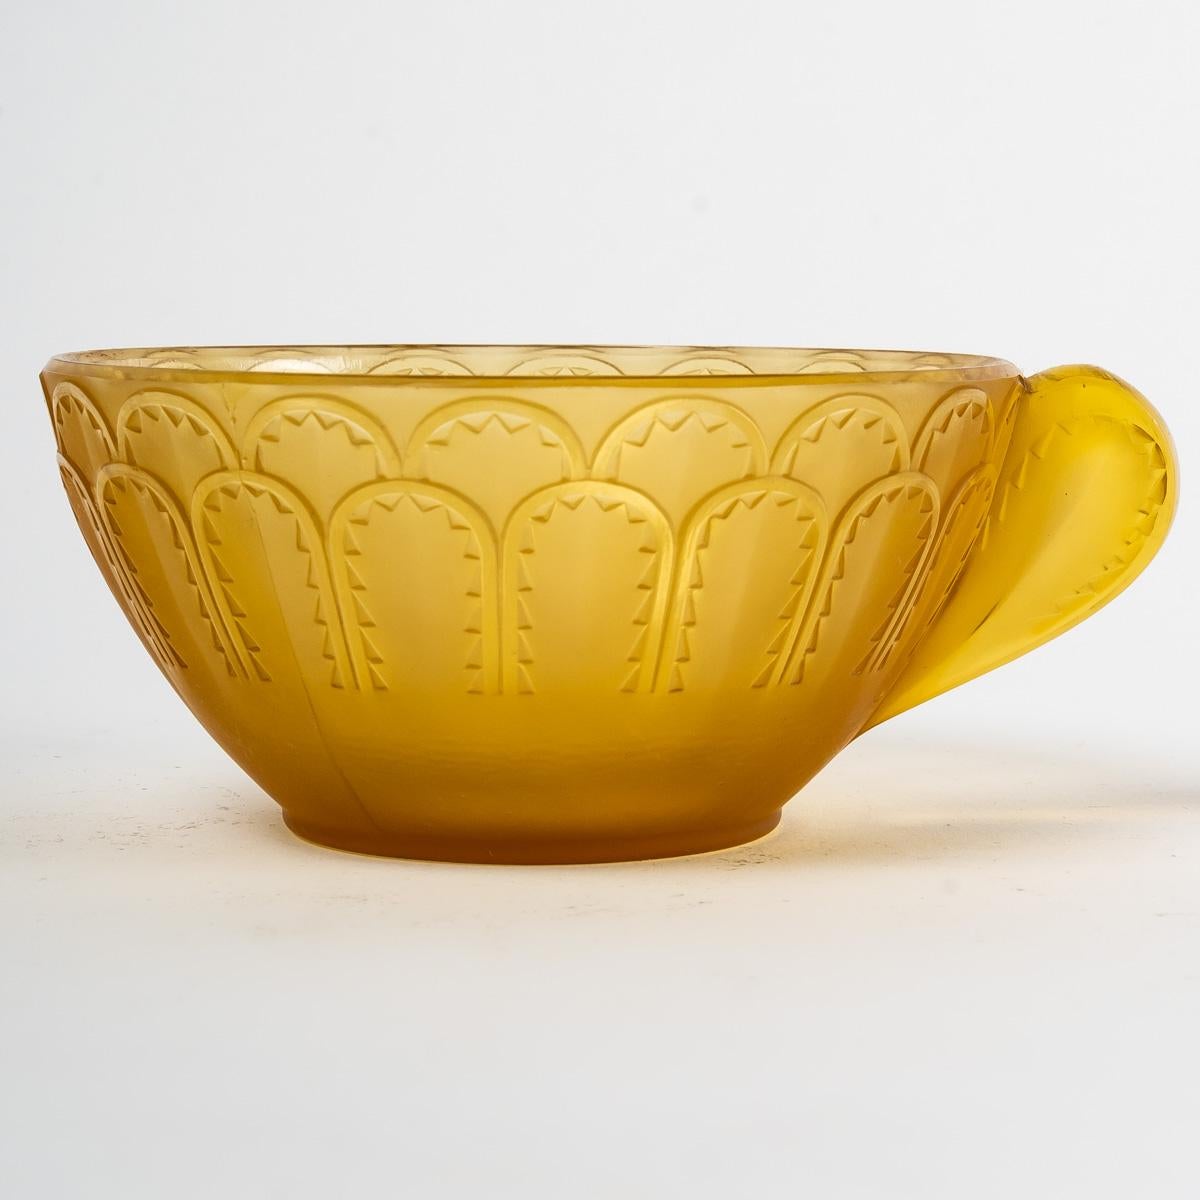 Molded 1931 René Lalique - Set Jaffa Yellow Amber Glass - 6 Cups + 1 Tray For Sale